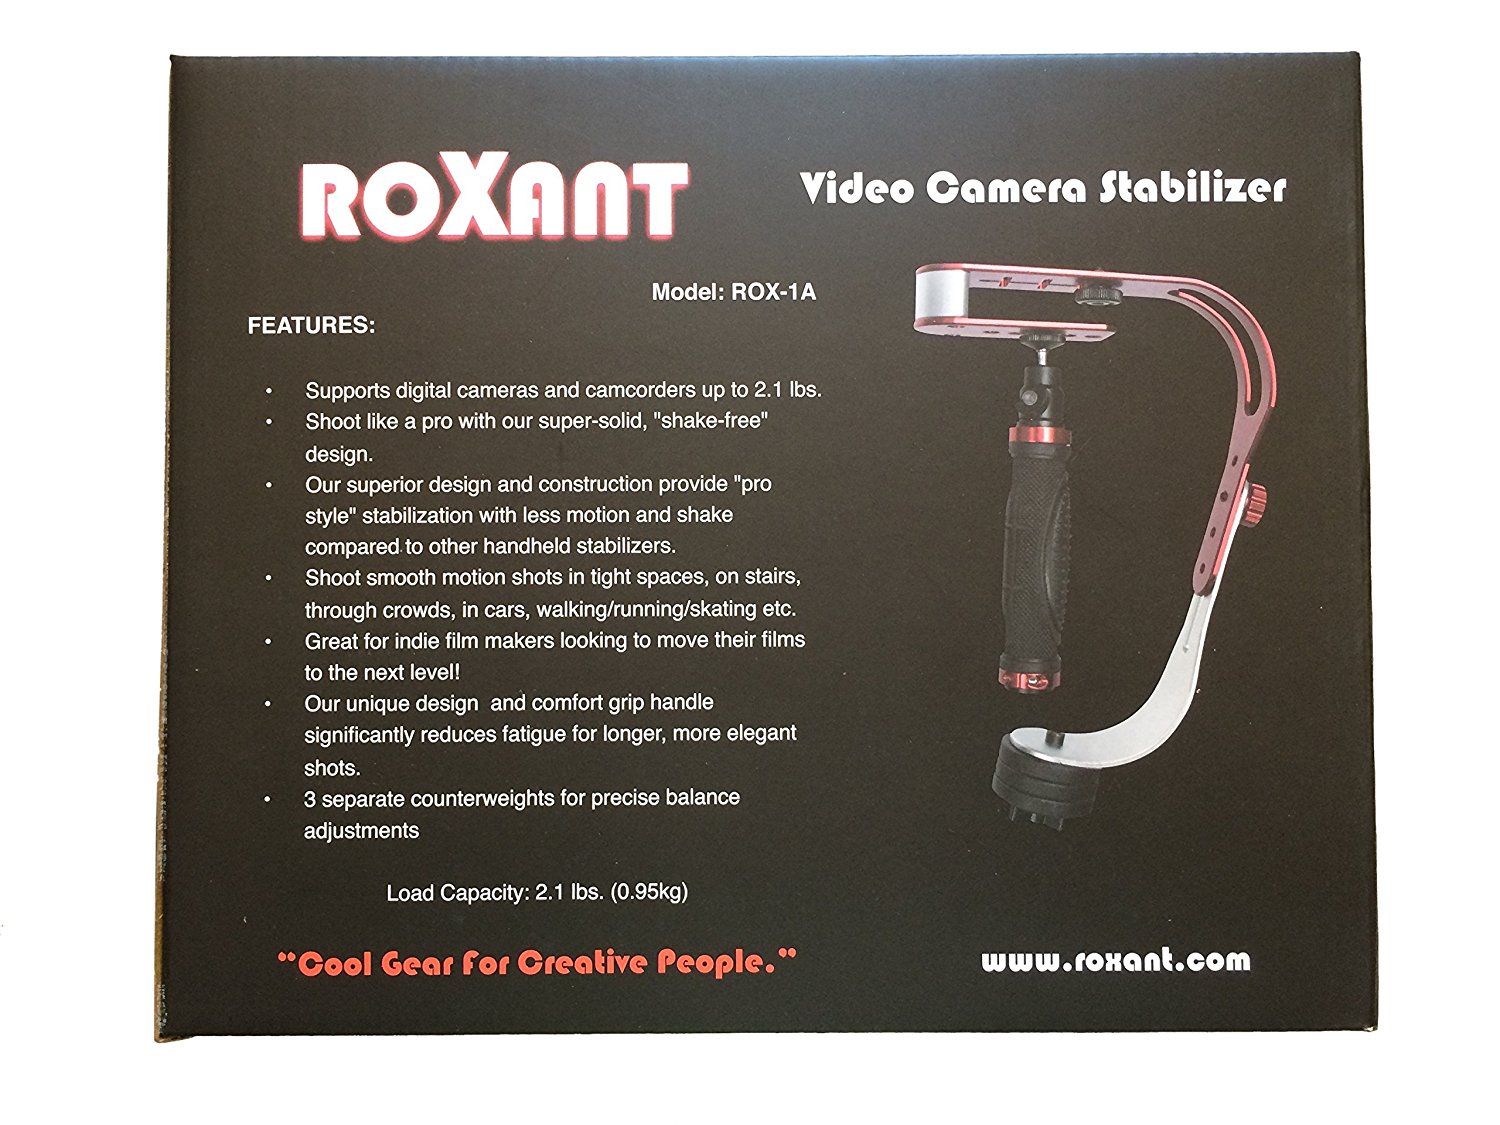 roxant 3 - The OFFICIAL ROXANT PRO video camera stabilizer GIVEAWAY !!!!